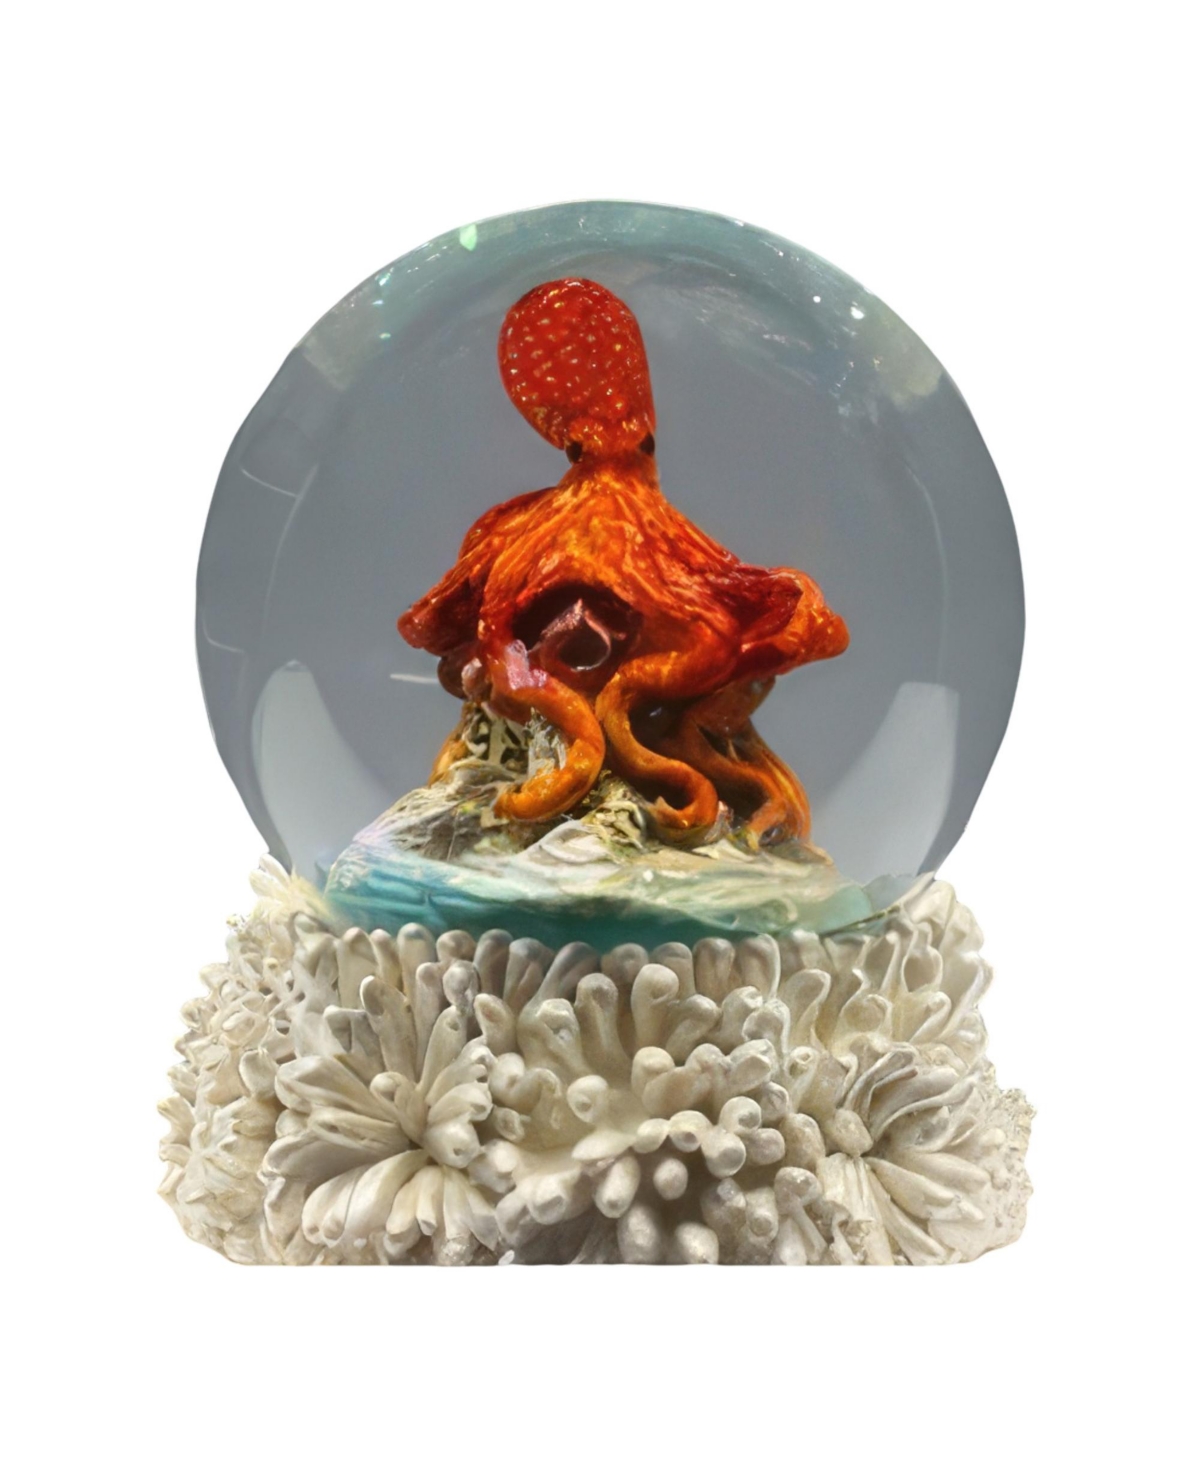 3.25"H Octopus Snow Globe Home Decor Perfect Gift for House Warming, Holidays and Birthdays - Multicolor